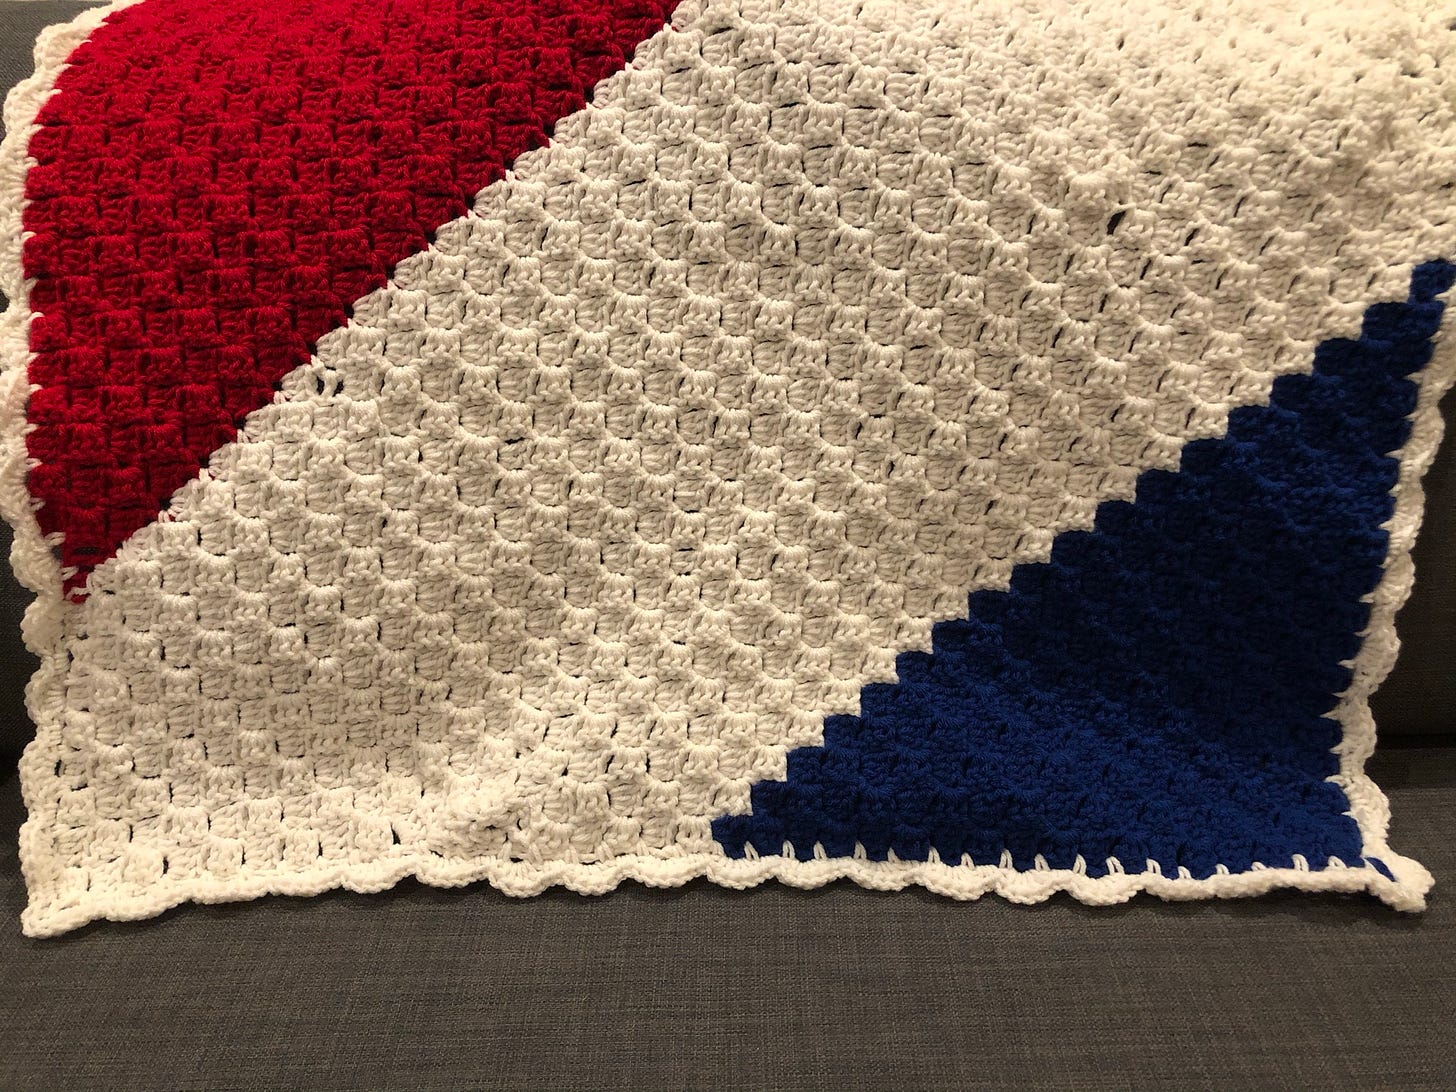 Diagonal red white and blue striped crocheted baby blanket laying over the back of a couch